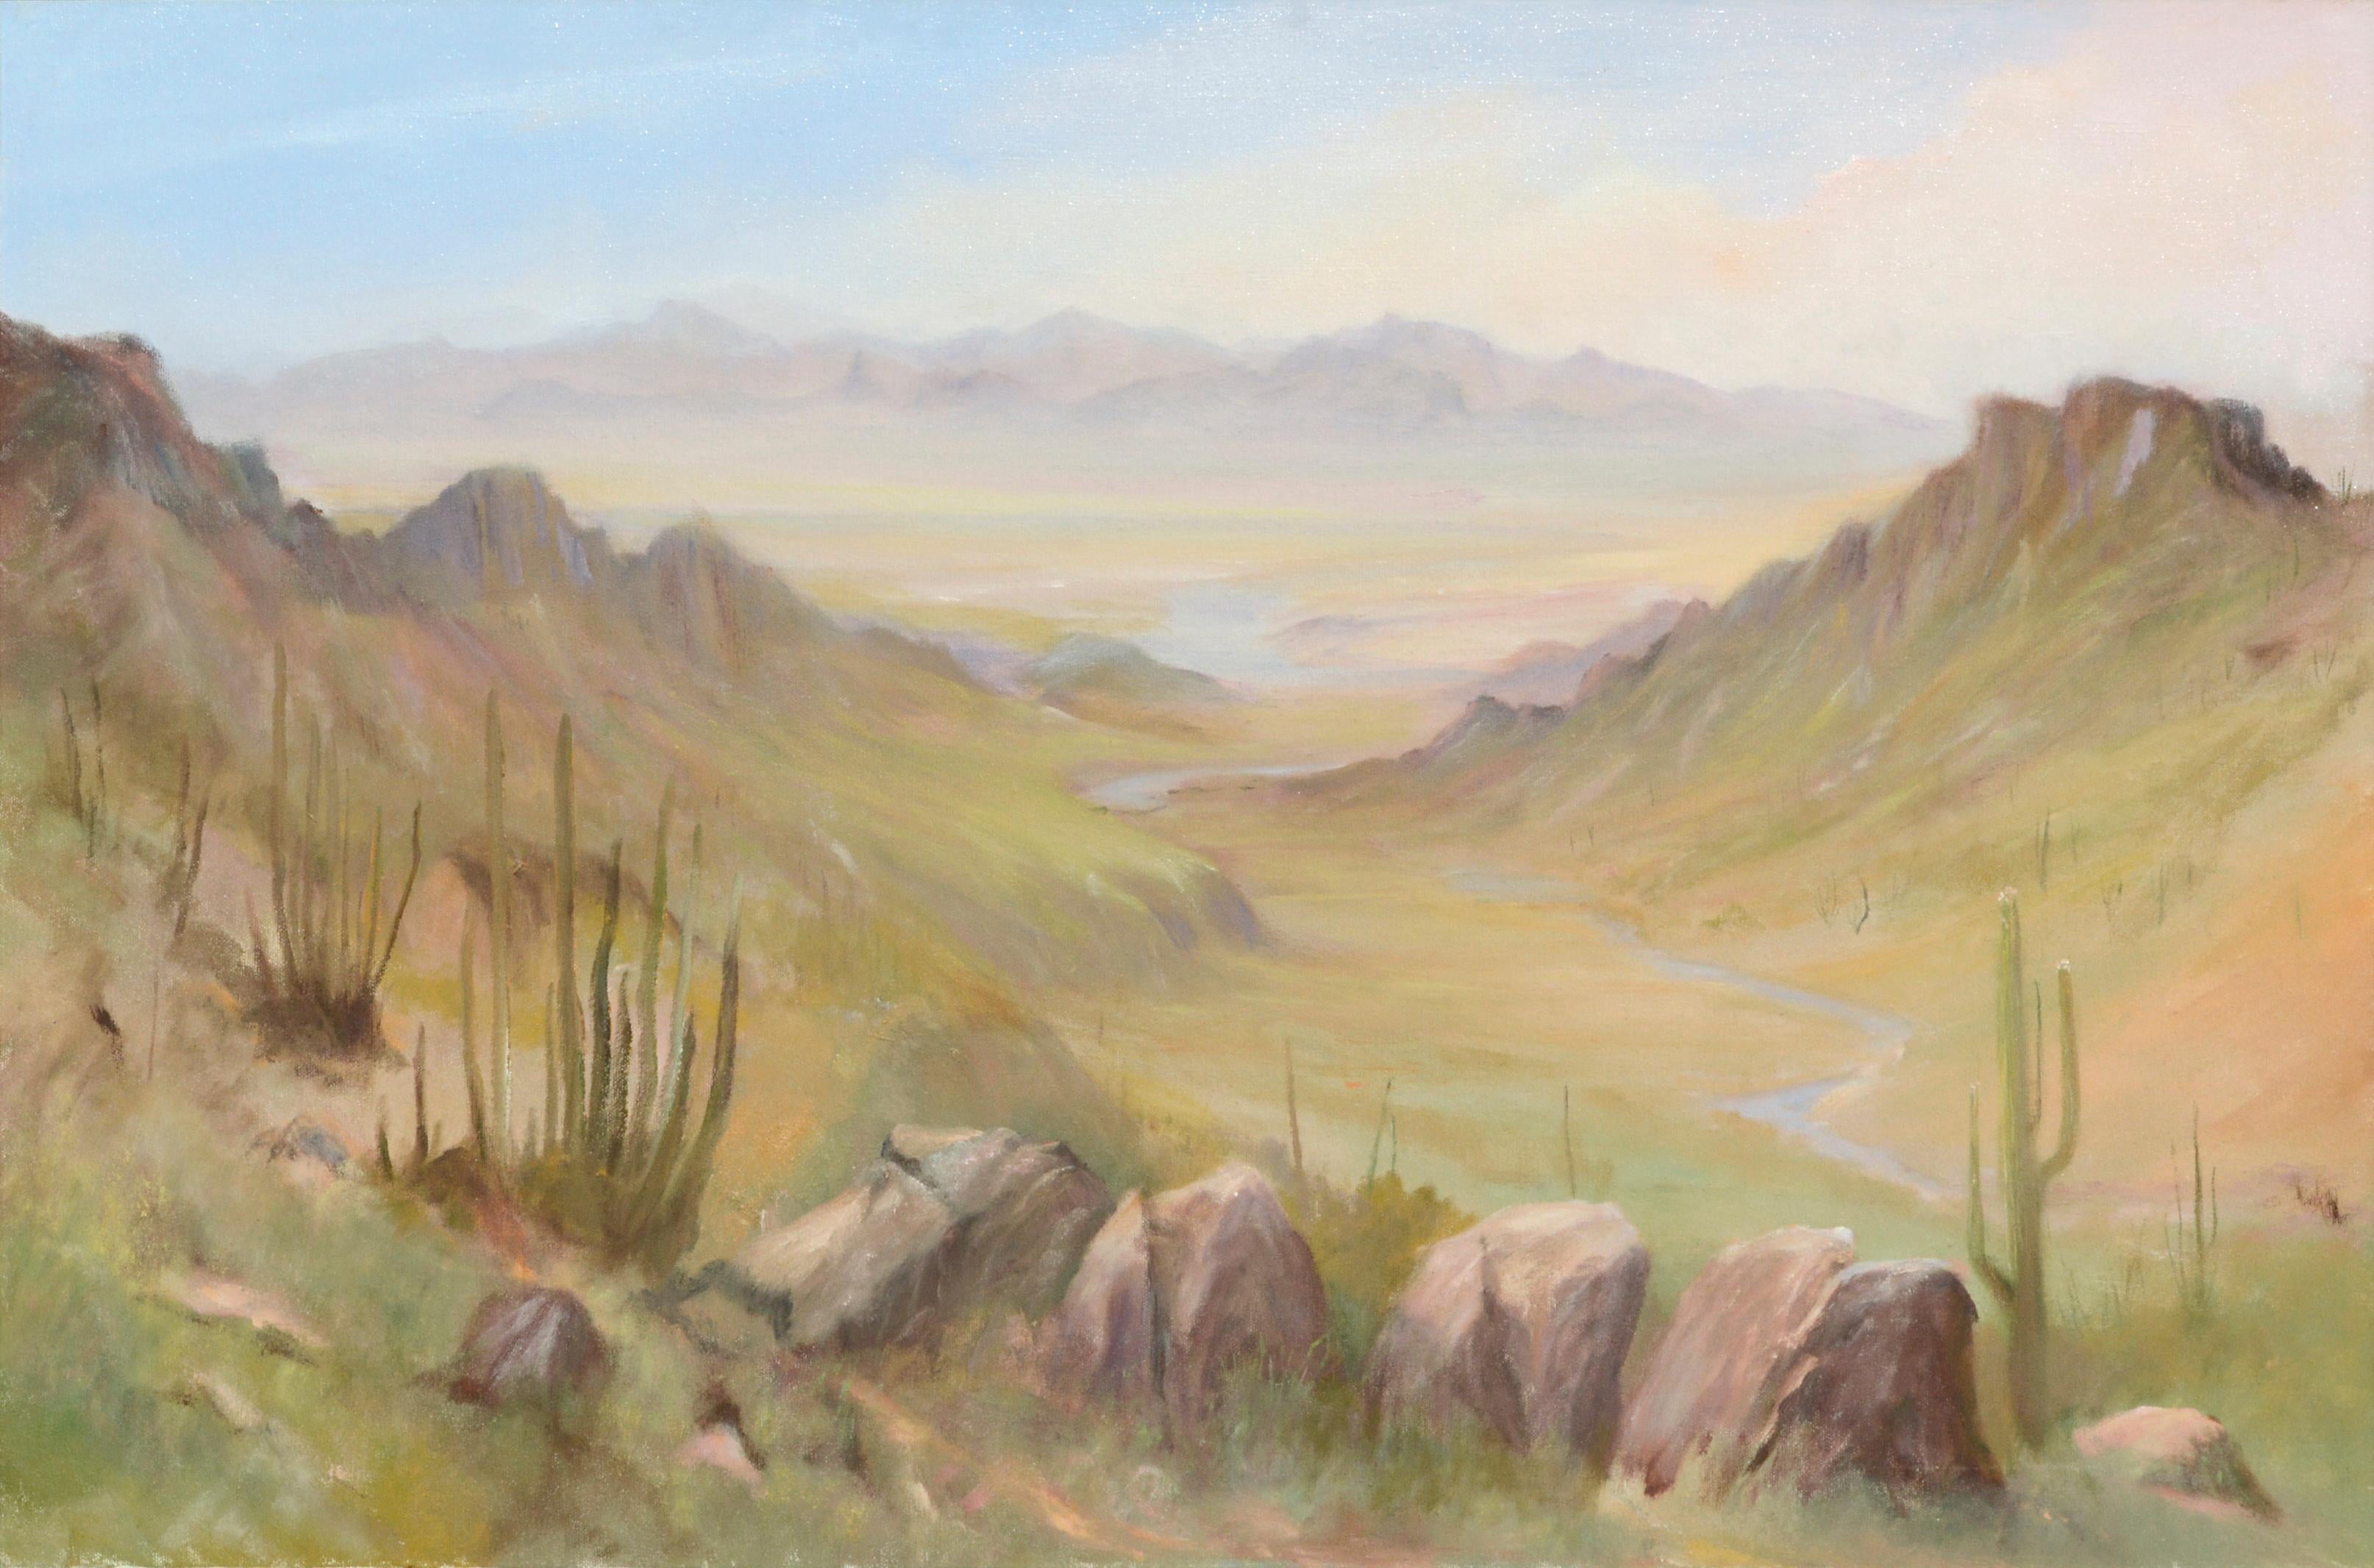 Arizona Valley Desert Landscape with Saguaro Cactus  - Painting by Kenneth Lucas